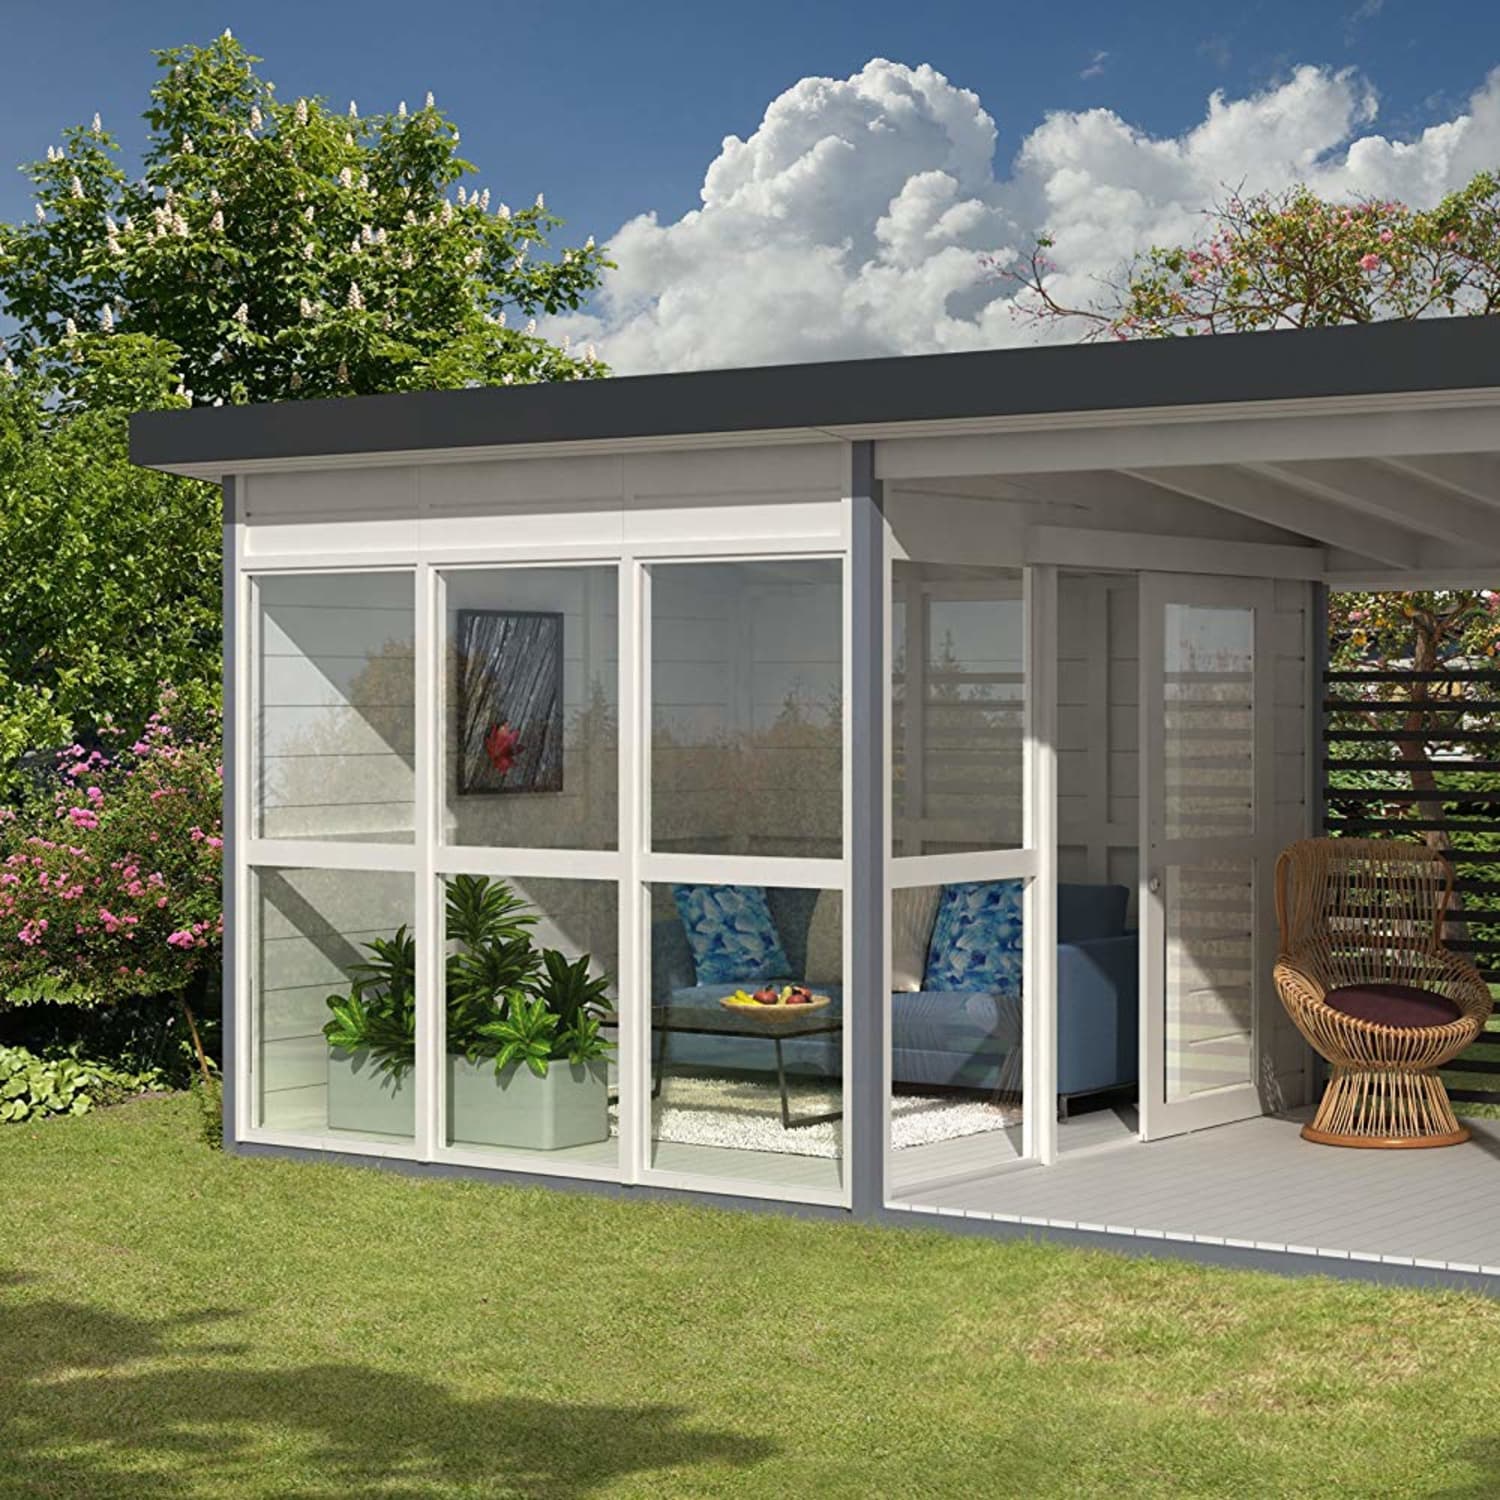 Prefab Tiny Houses You Can Buy On Amazon Apartment Therapy